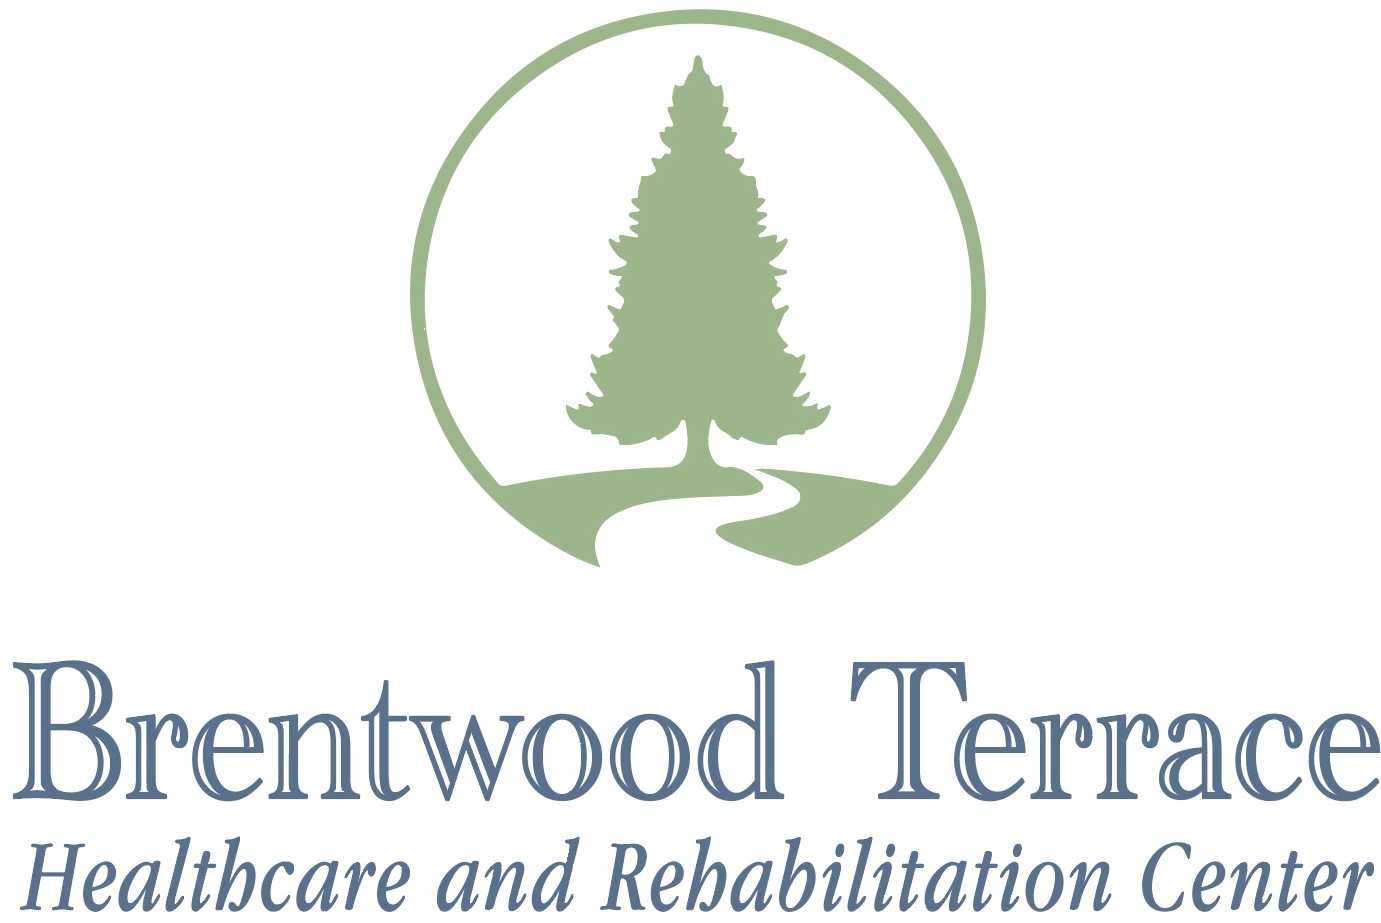 Brentwood Terrace Healthcare and Rehabilitation Center